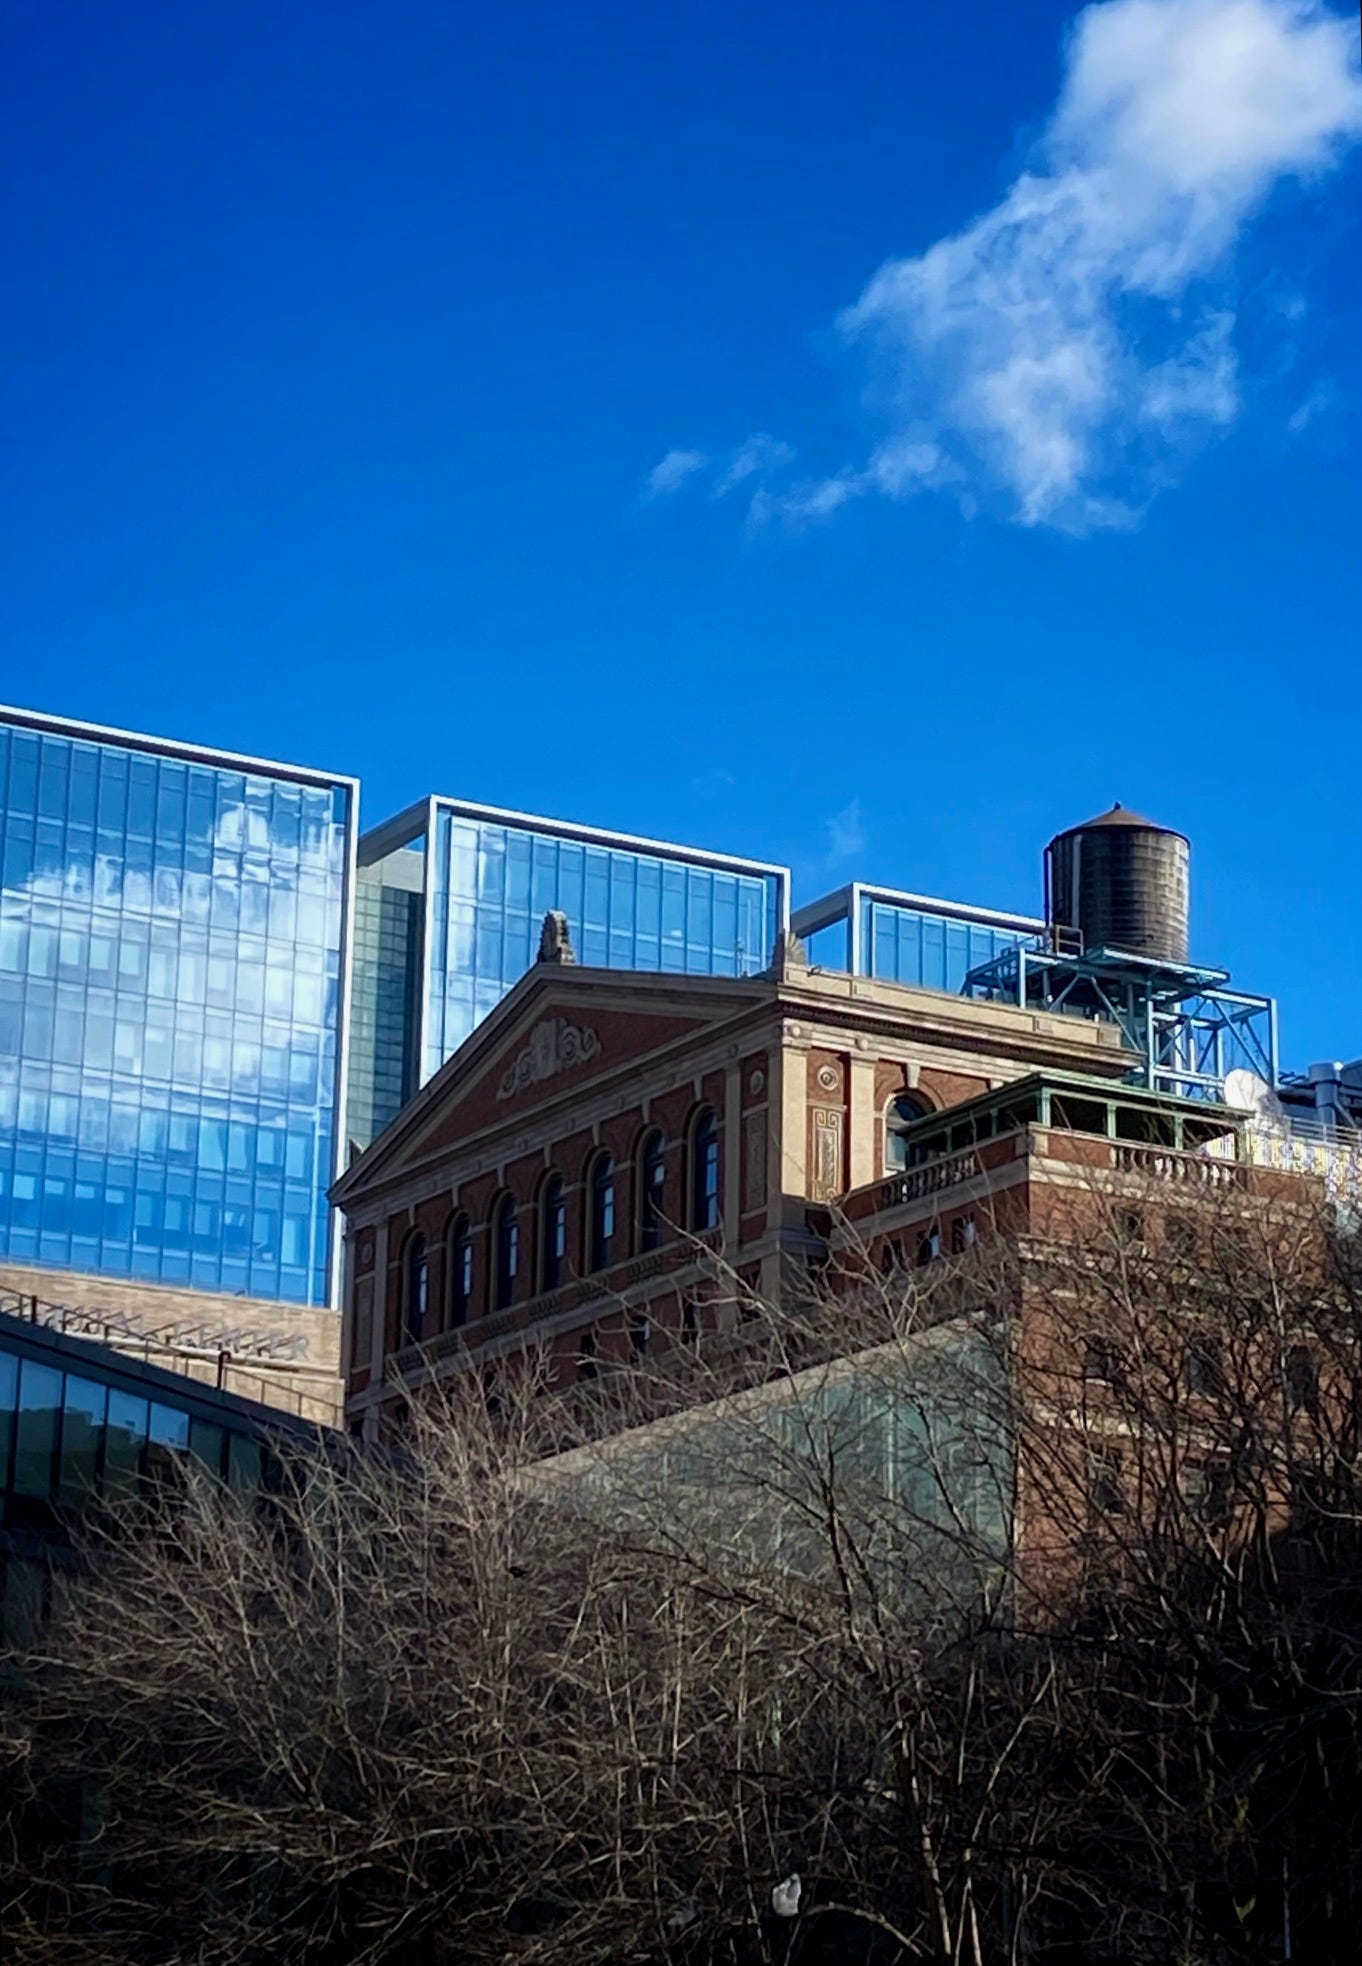 A water tower sits on a stately brick building. Behind it a modern glass building reflecting the deep blue sky and the few clouds.